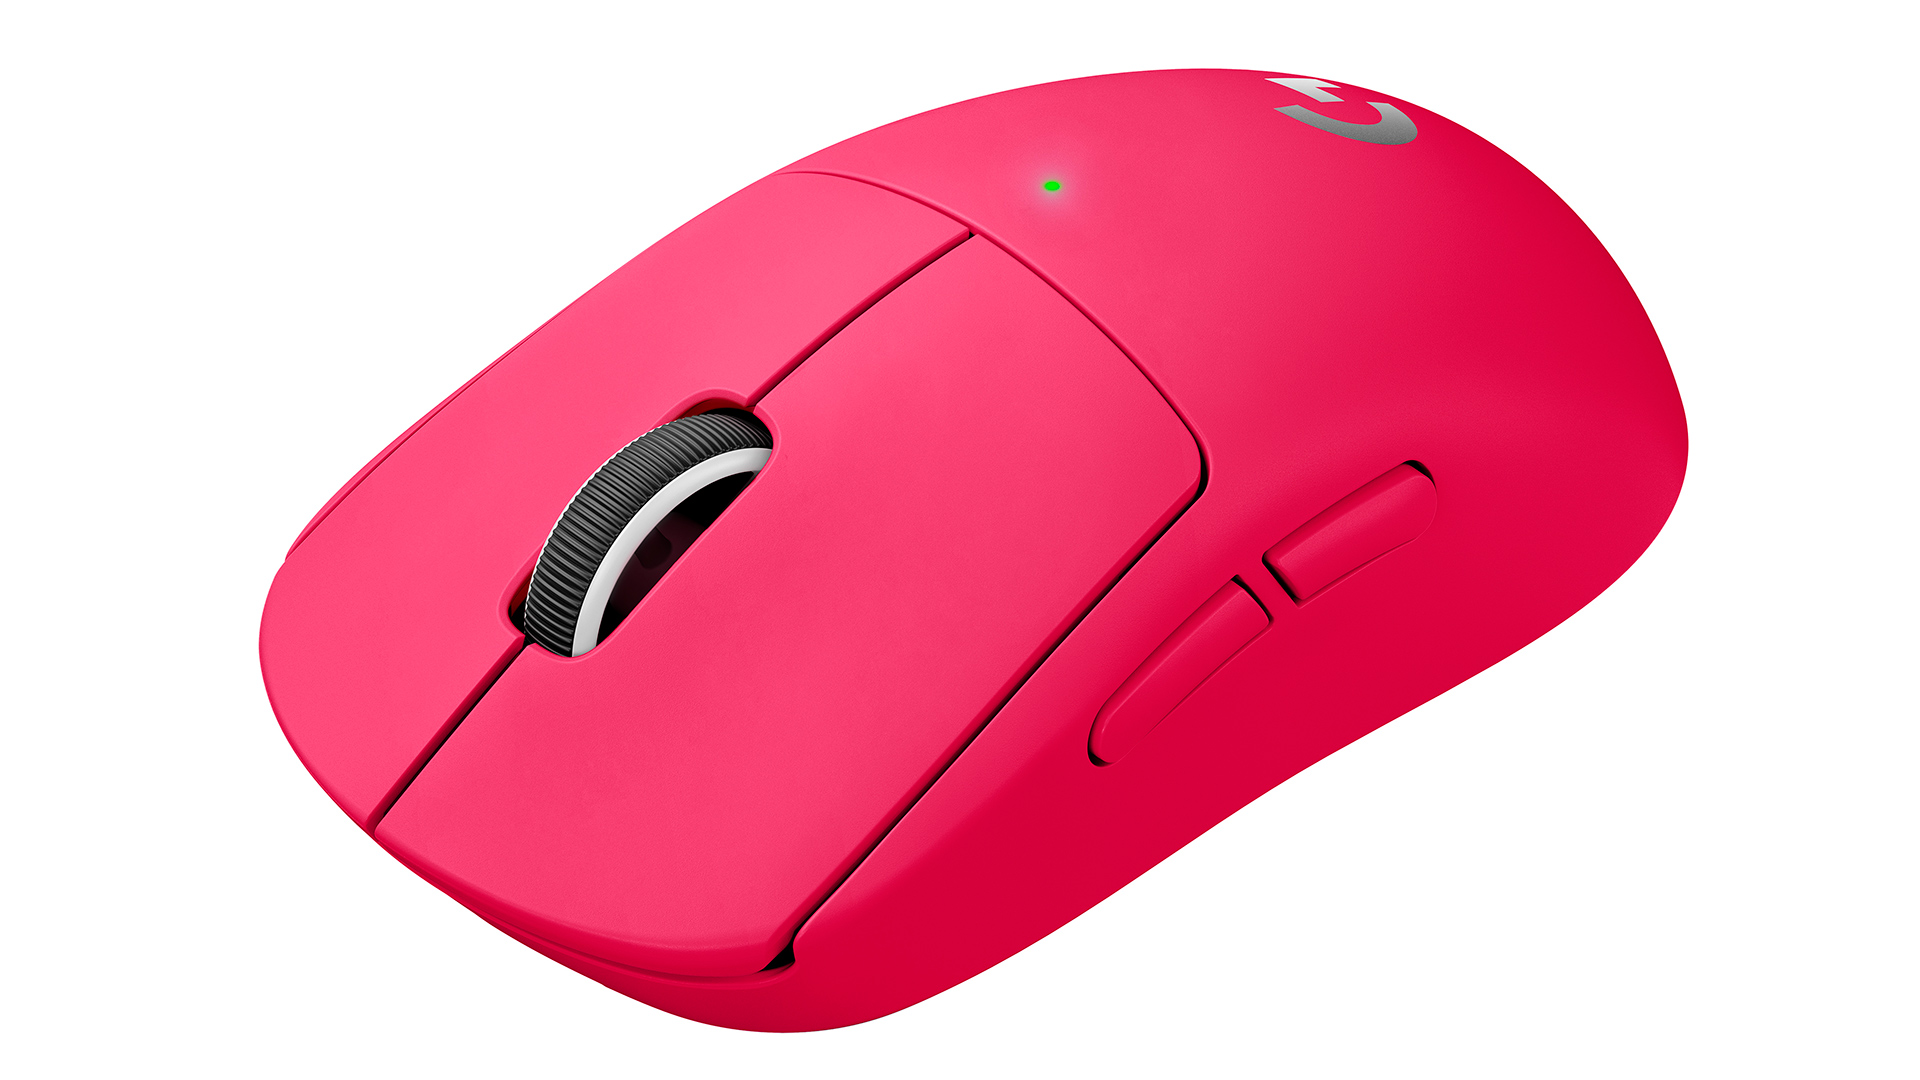 PRO X SUPERLIGHT Wireless Gaming Mouse Front